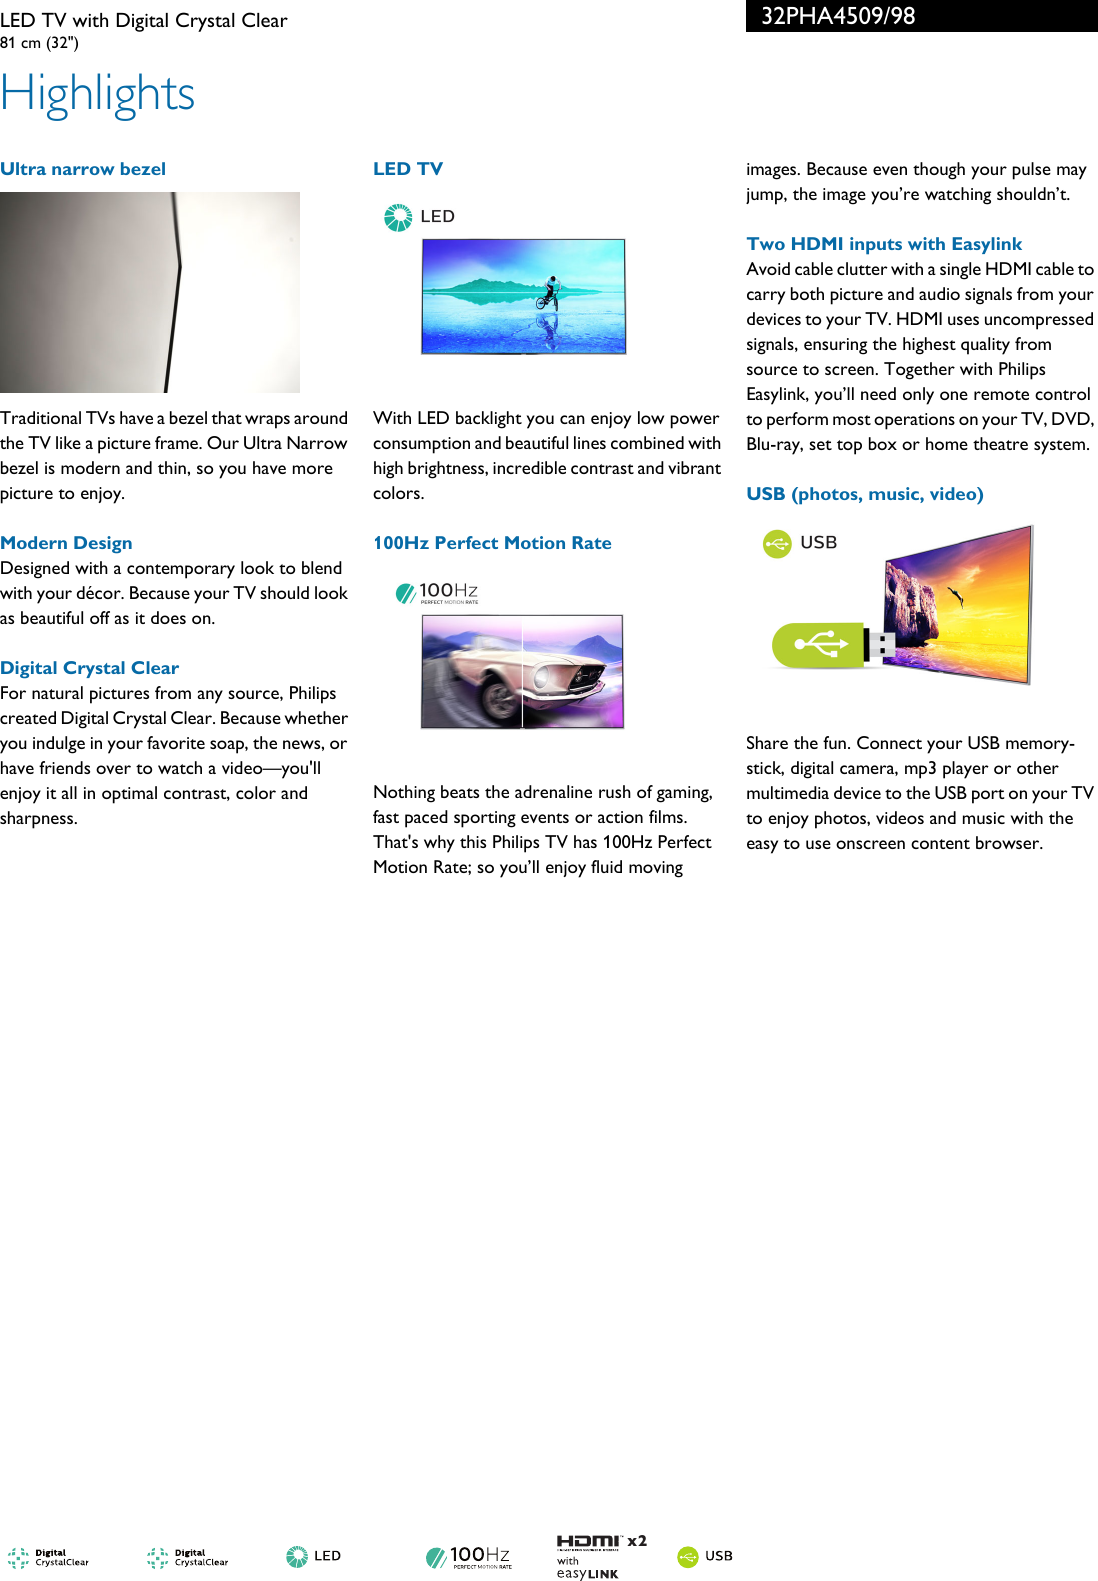 Page 2 of 3 - Philips 32PHA4509/98 LED TV With Digital Crystal Clear User Manual Leaflet 32pha4509 98 Pss Aenhk